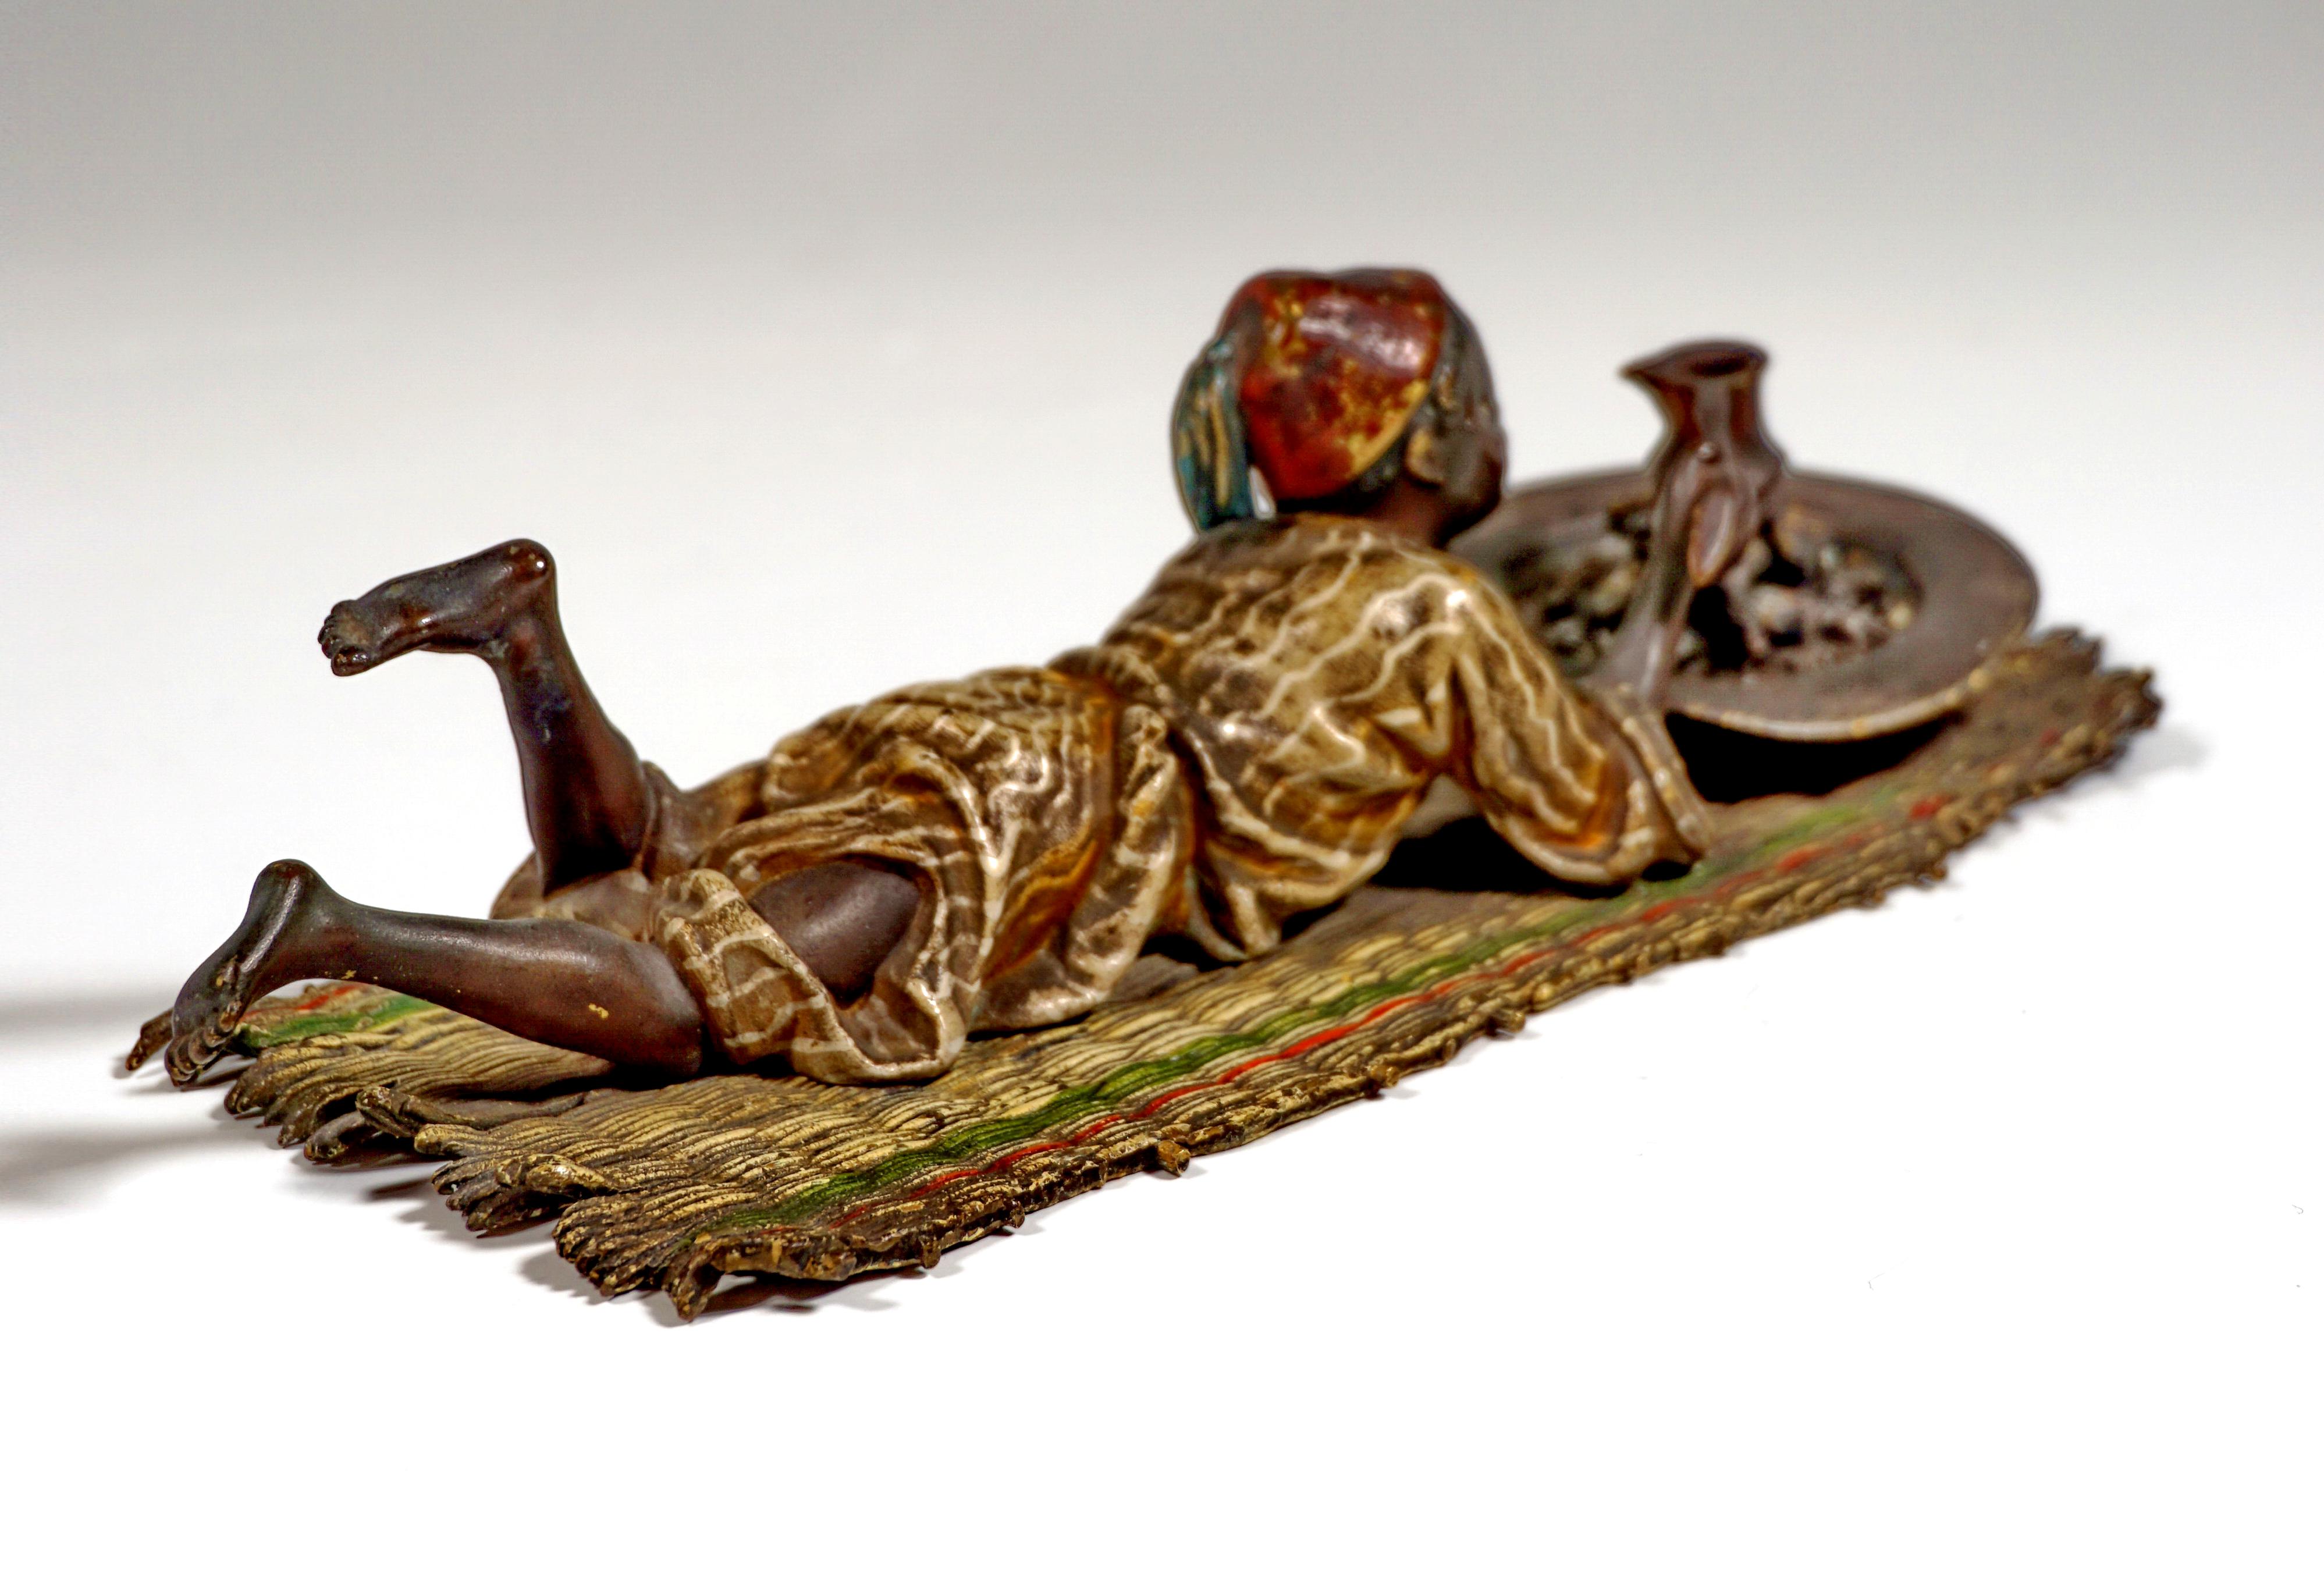 Other Coffee-Making Arab Lying on His Belly, Viennese Bronze by Bergmann, around 1900